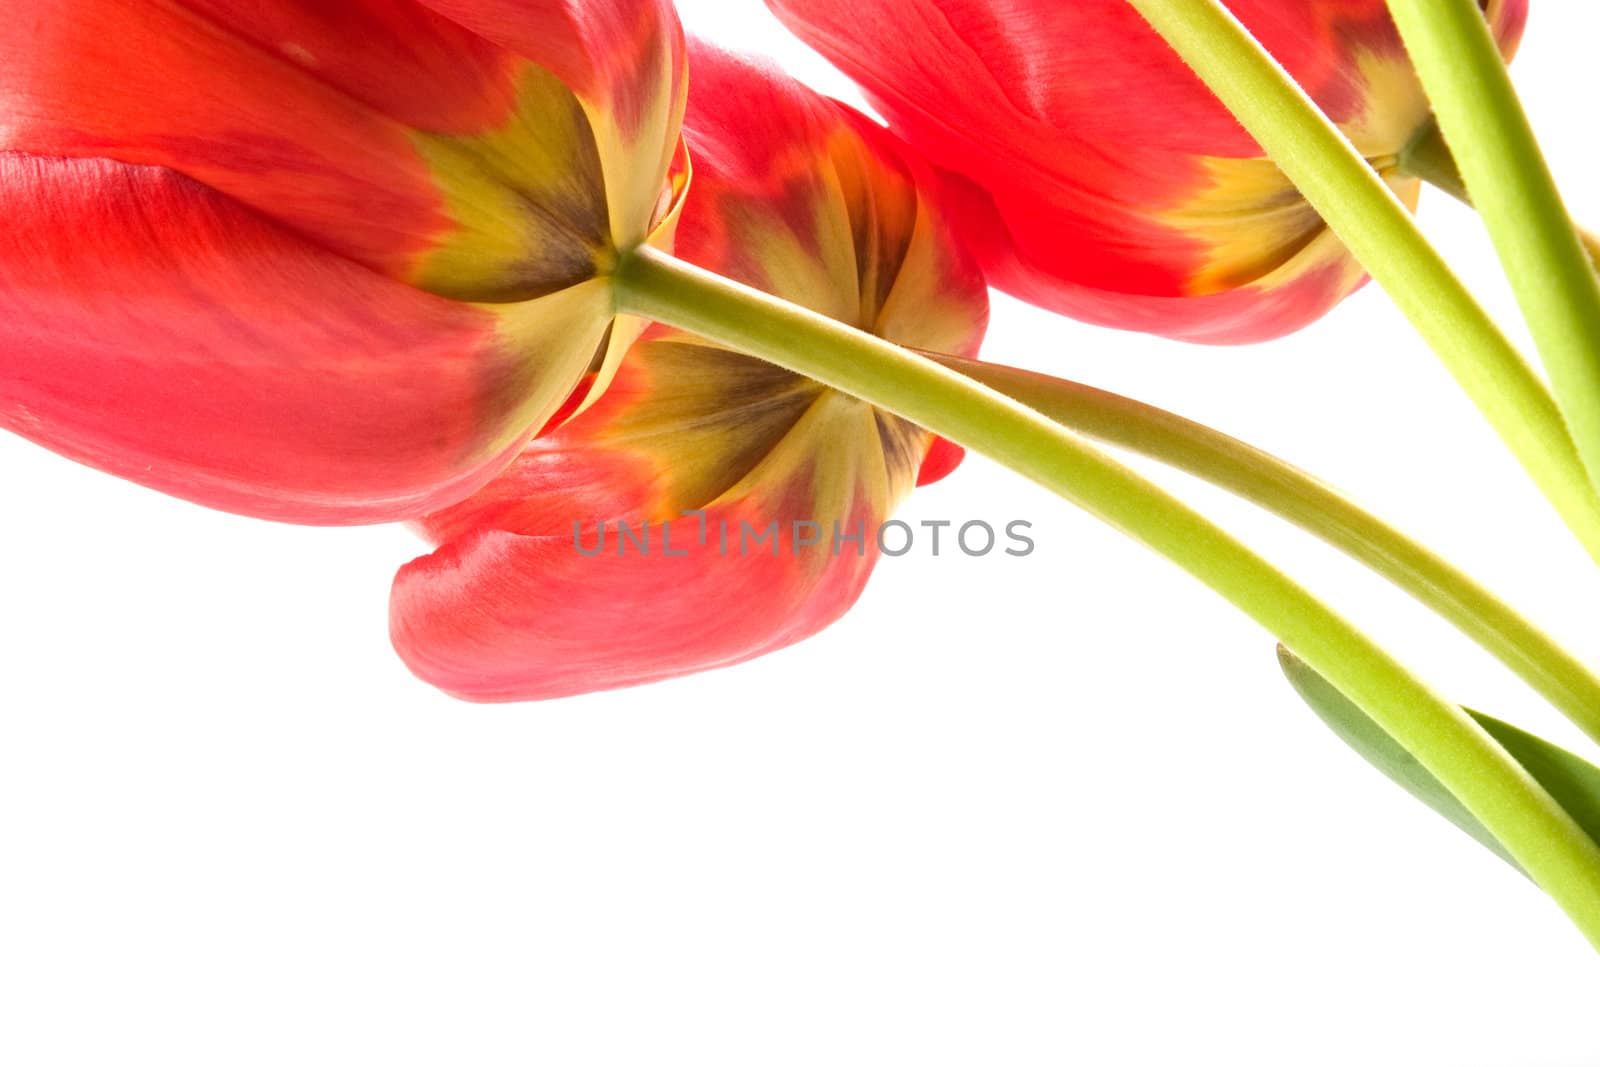 Red tulips by stefan_andronache